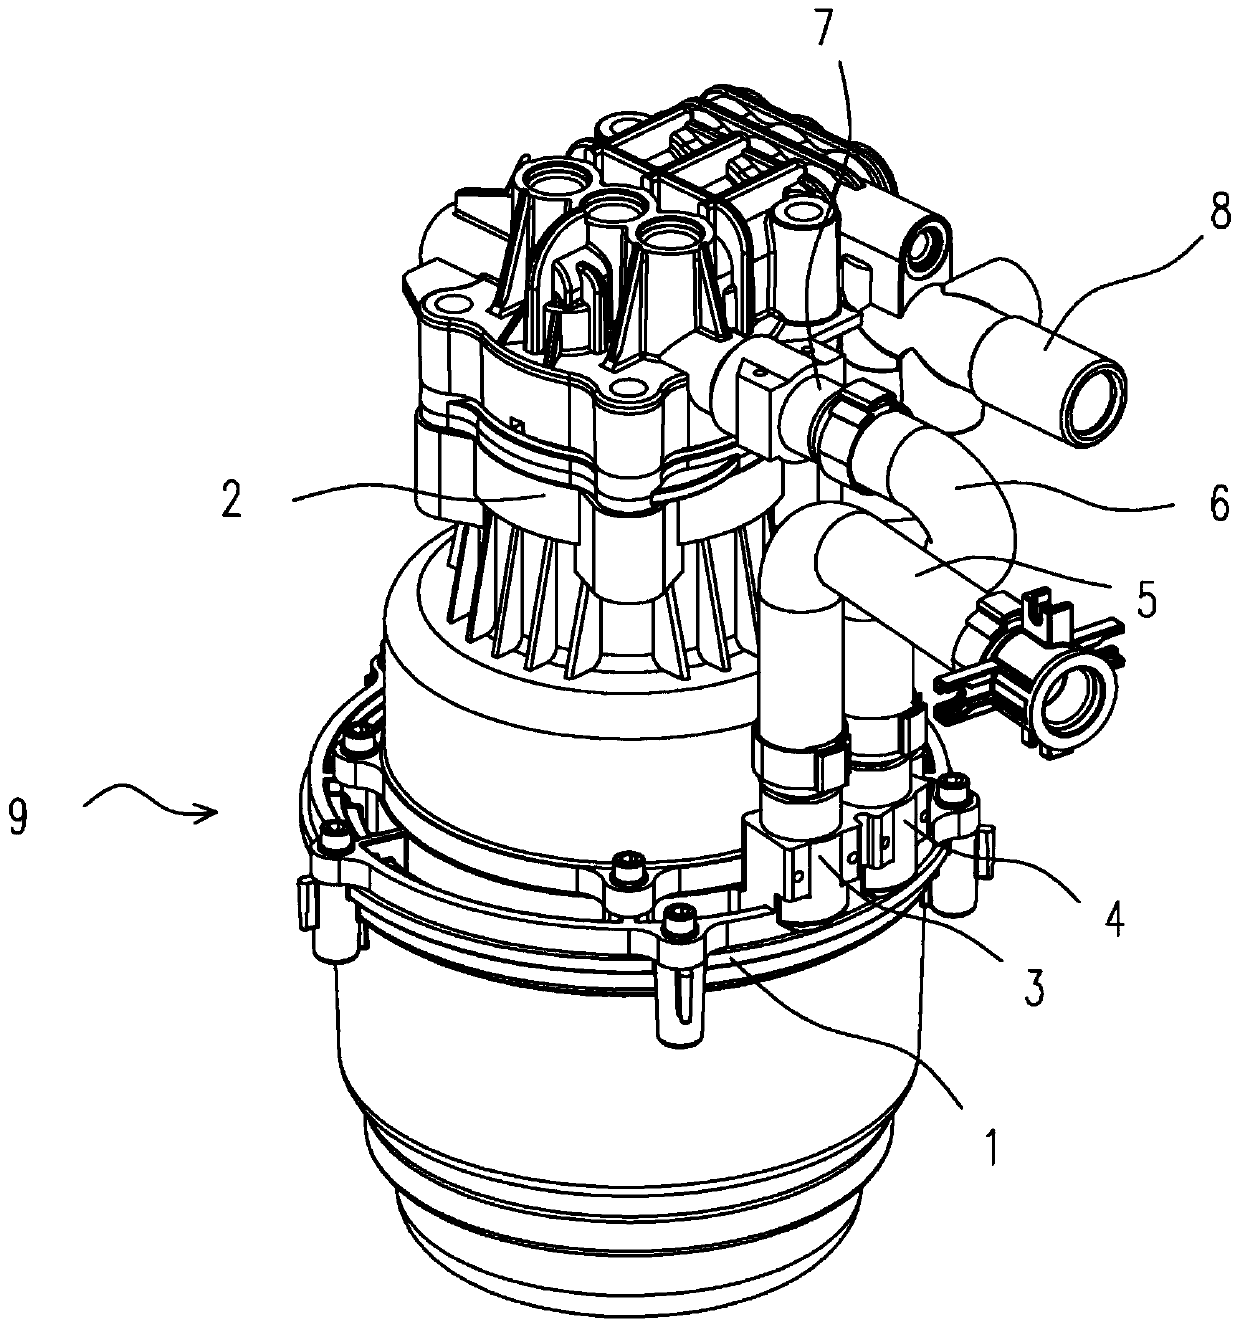 A low-temperature antifreeze water-cooled motor pump unit and a high-pressure cleaner